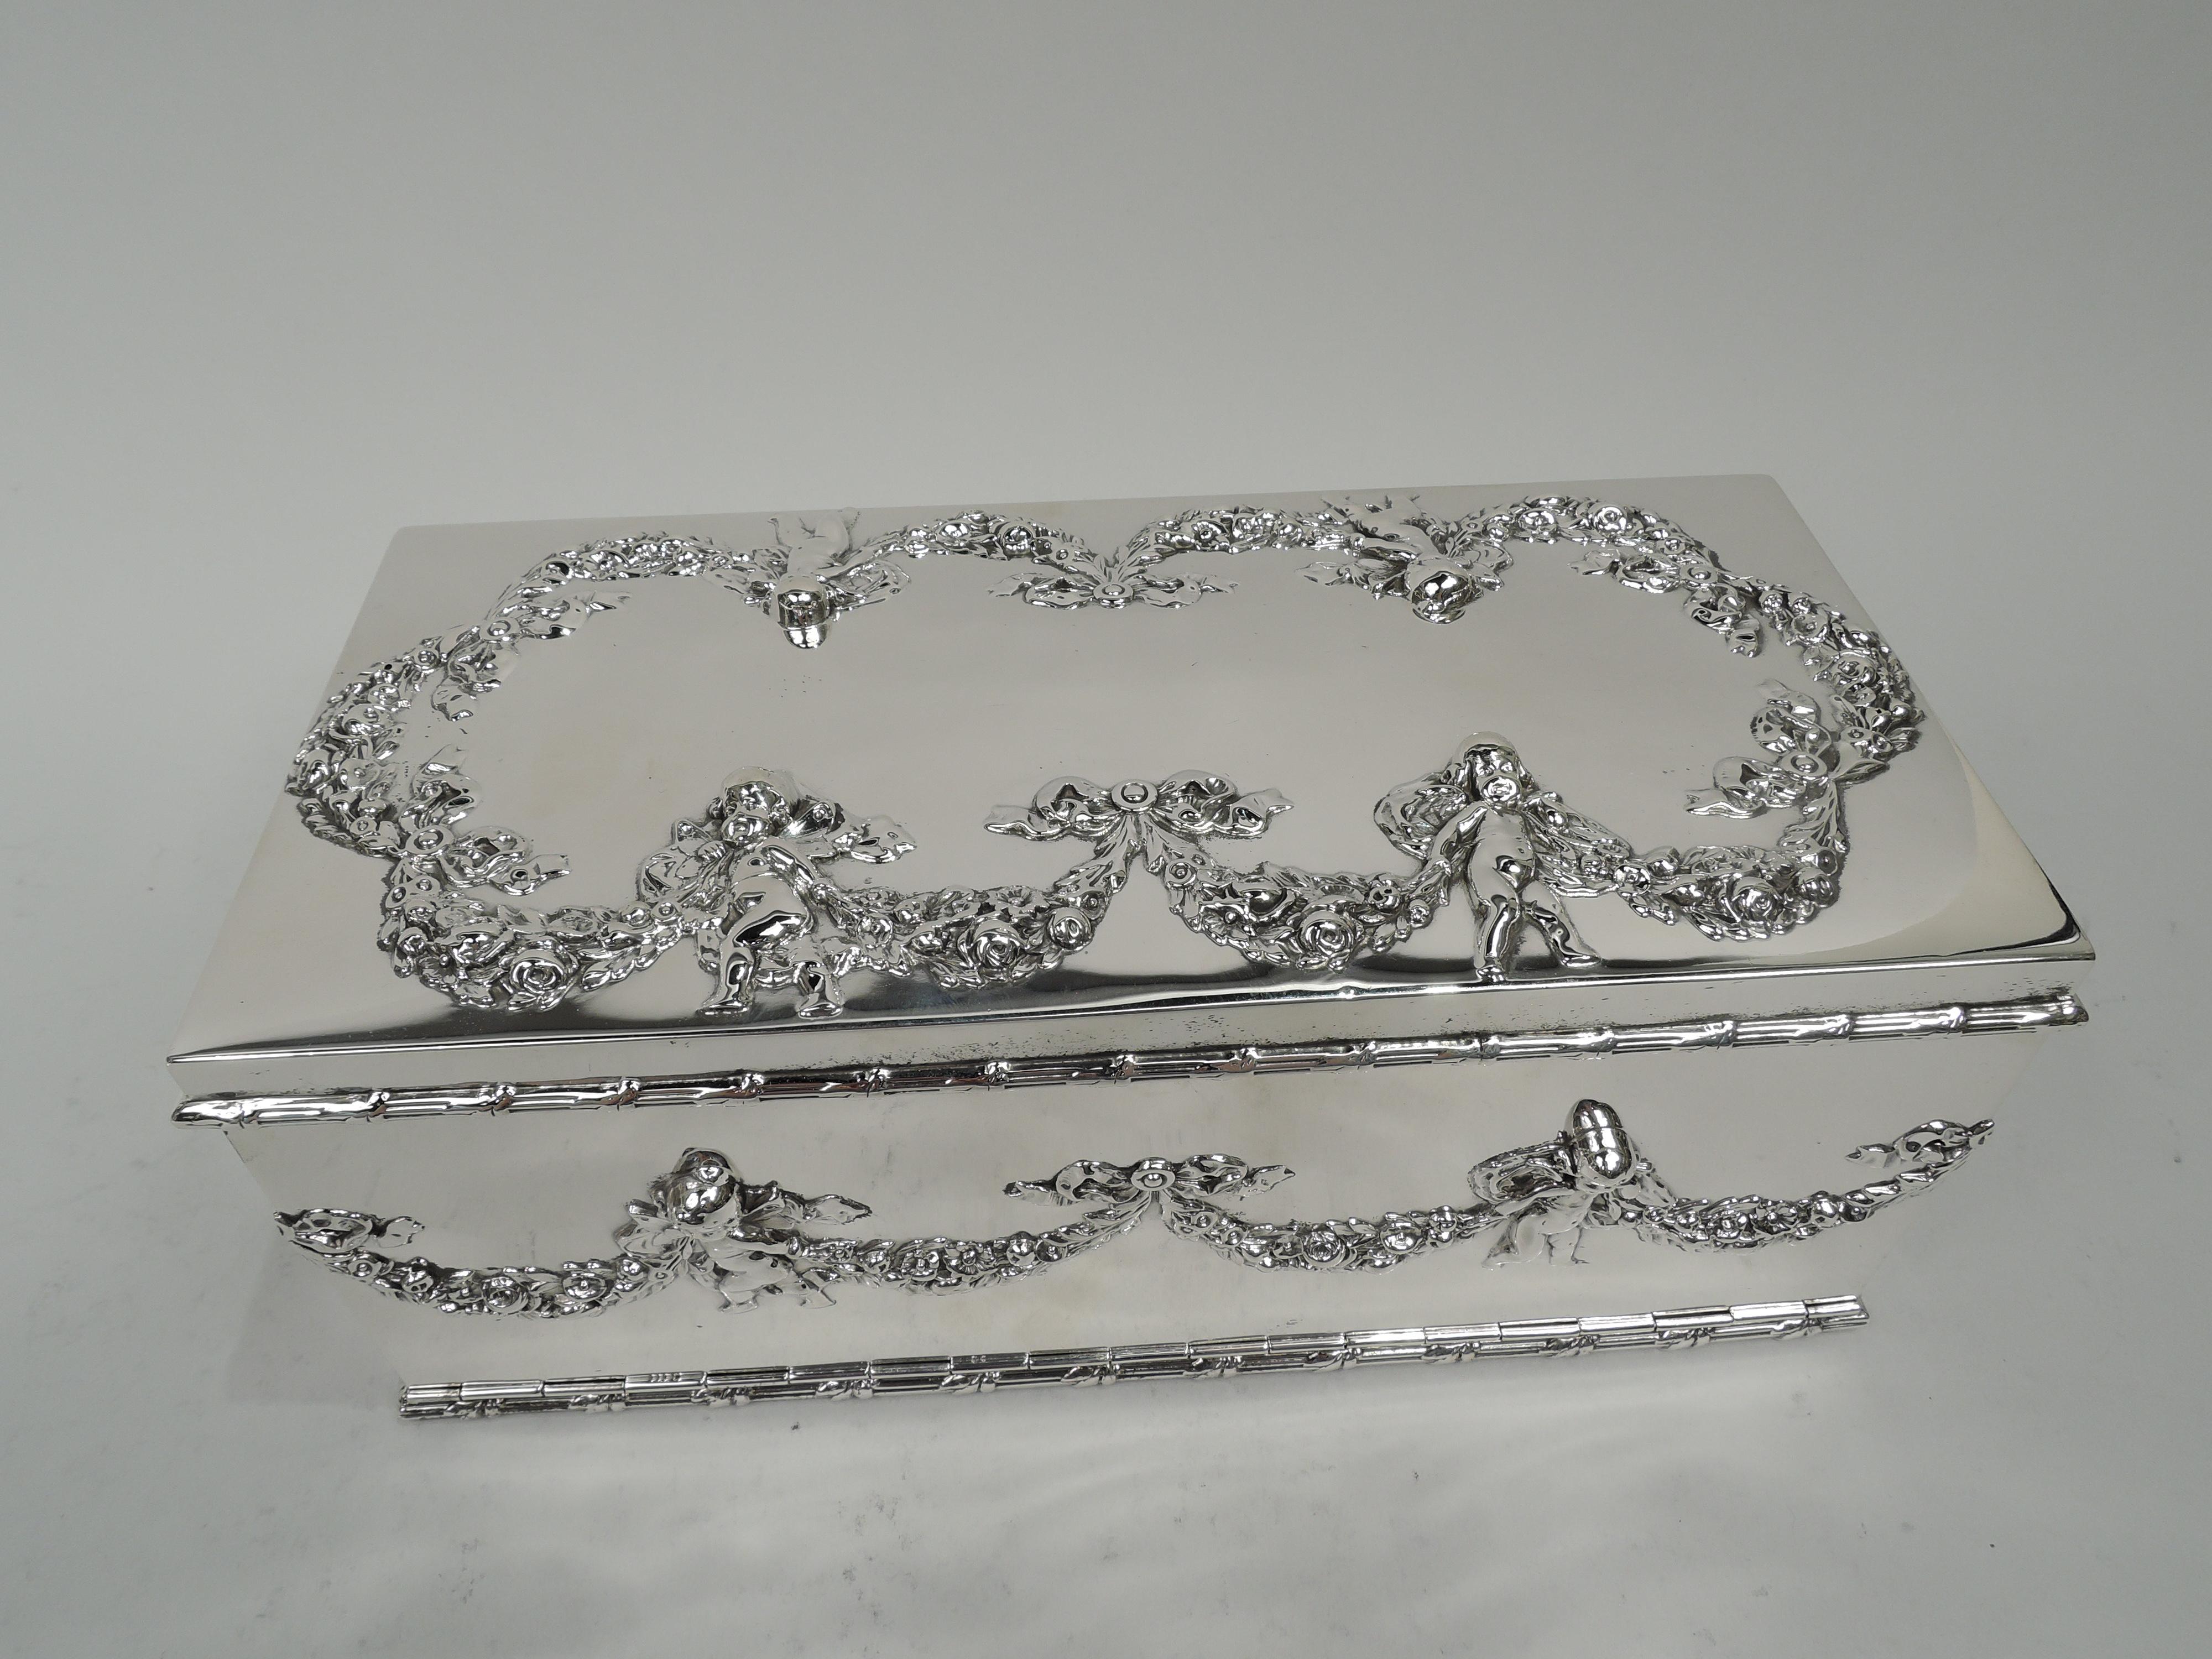 Edwardian Regency sterling silver jewelry box. Made by William B. Durgin in Concord, ca 1910. Rectangular with straight sides and hinged drop-front. Cover hinged and flat. On sides, wraparound garland held-up by sweet bare-bottomed cherubs. Cover